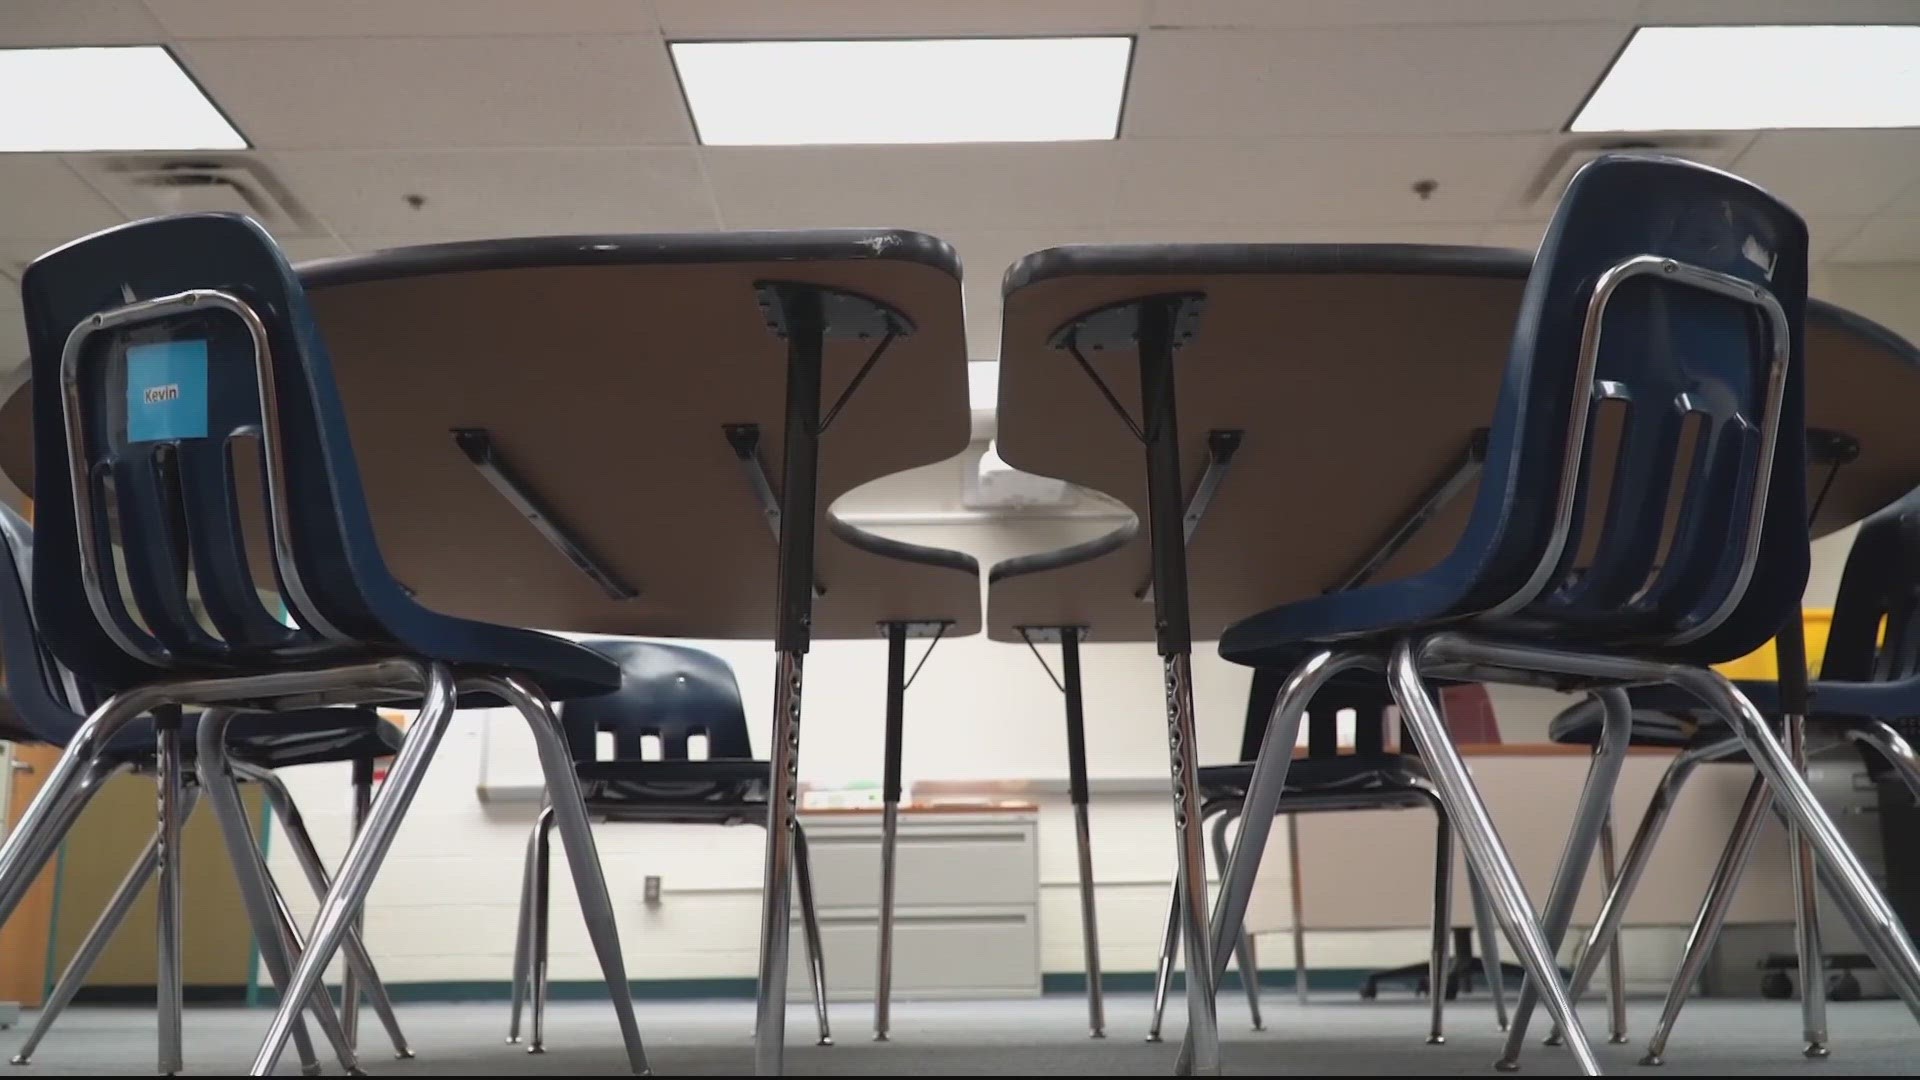 Chronic absenteeism has been on the rise since the pandemic. Here's how some educators plan to fix it.